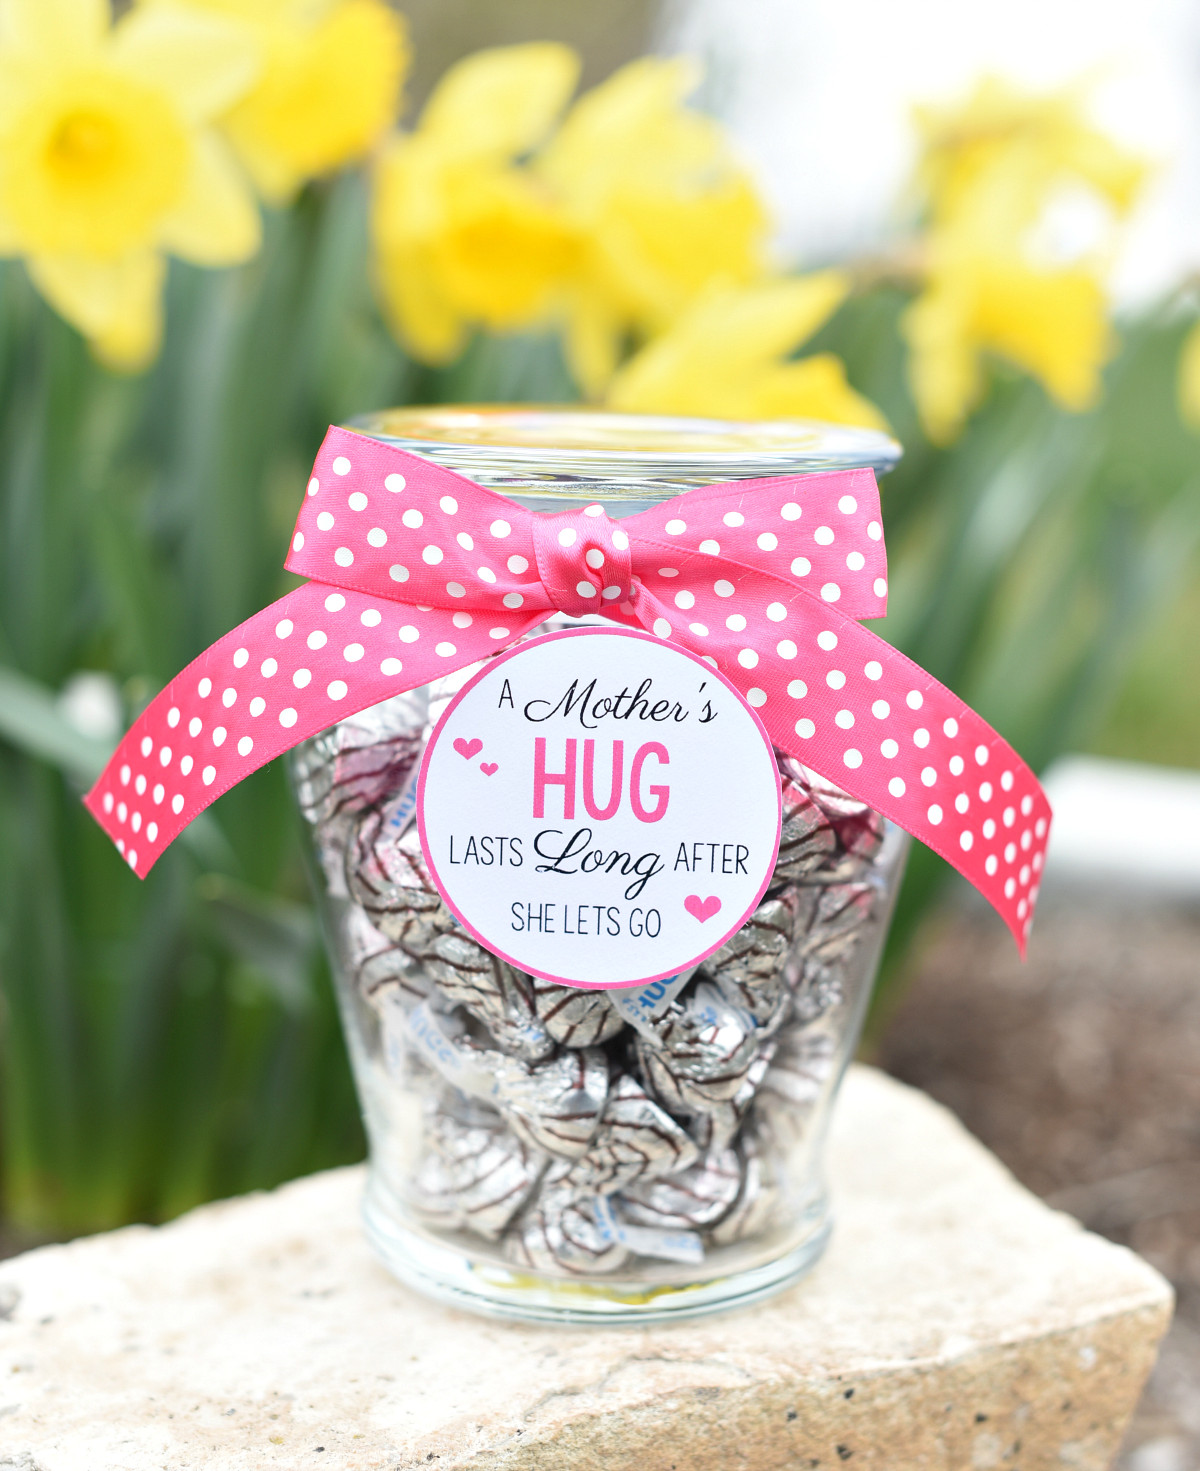 Mothers Day Gift Ideas Pinterest
 Sentimental Gift Ideas for Mother s Day – Fun Squared